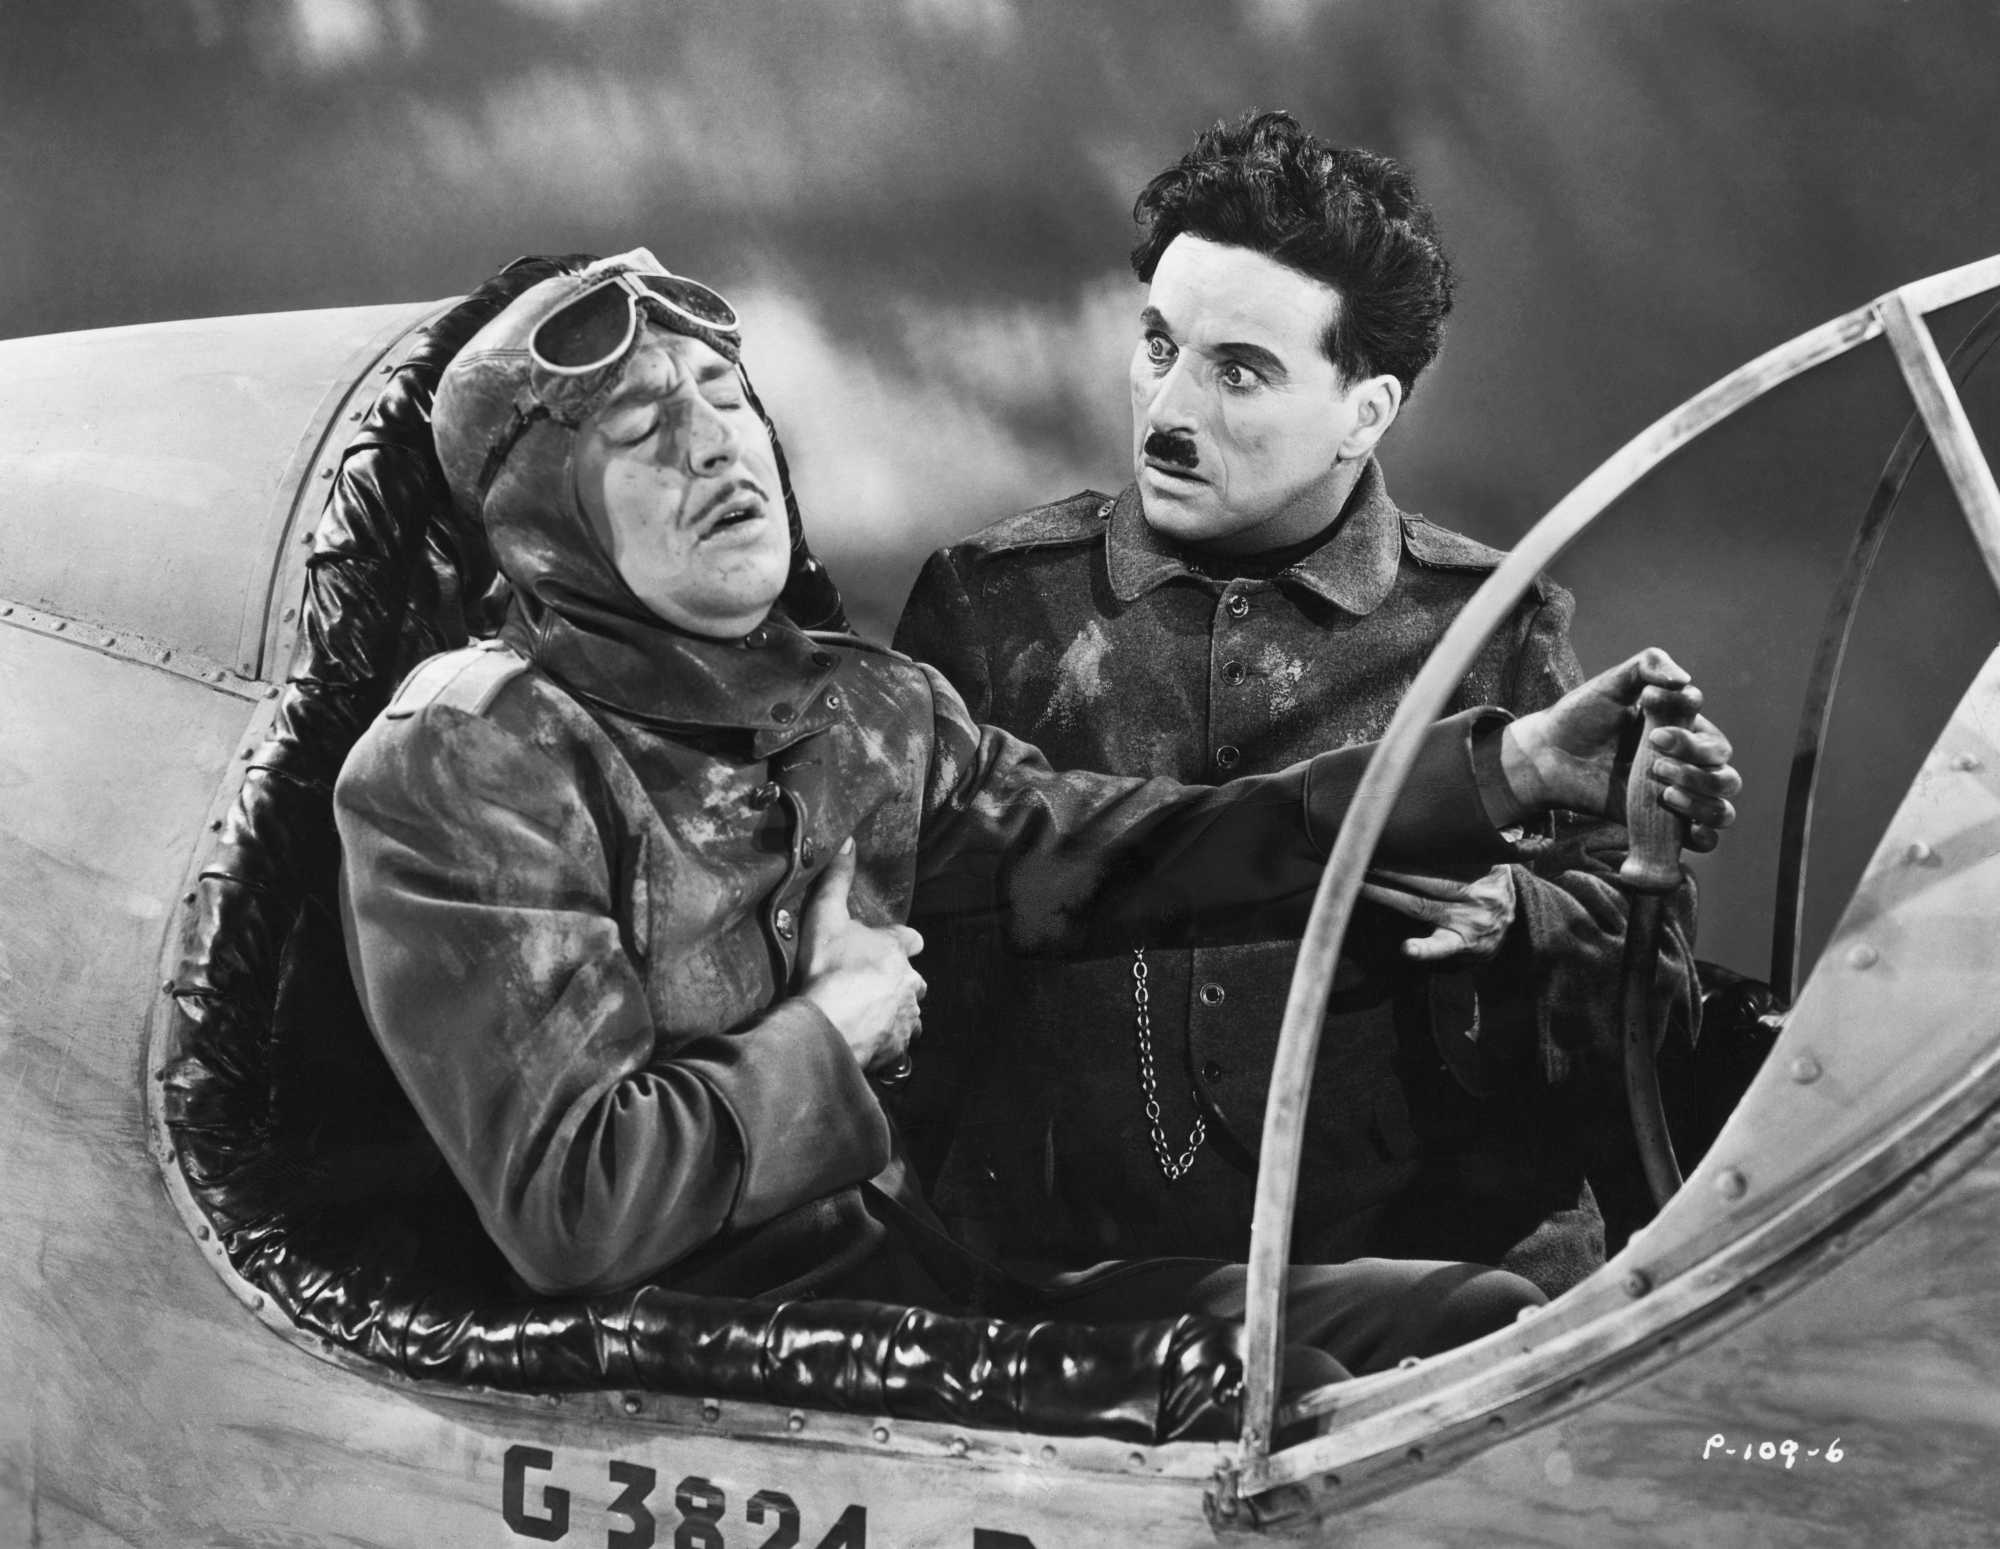 'The Great Dictator' Charlie Chaplin as Hynkel - Dictator of Tomania. He's looking at an unknown actor in a jet cockpit, clutching onto his chest.